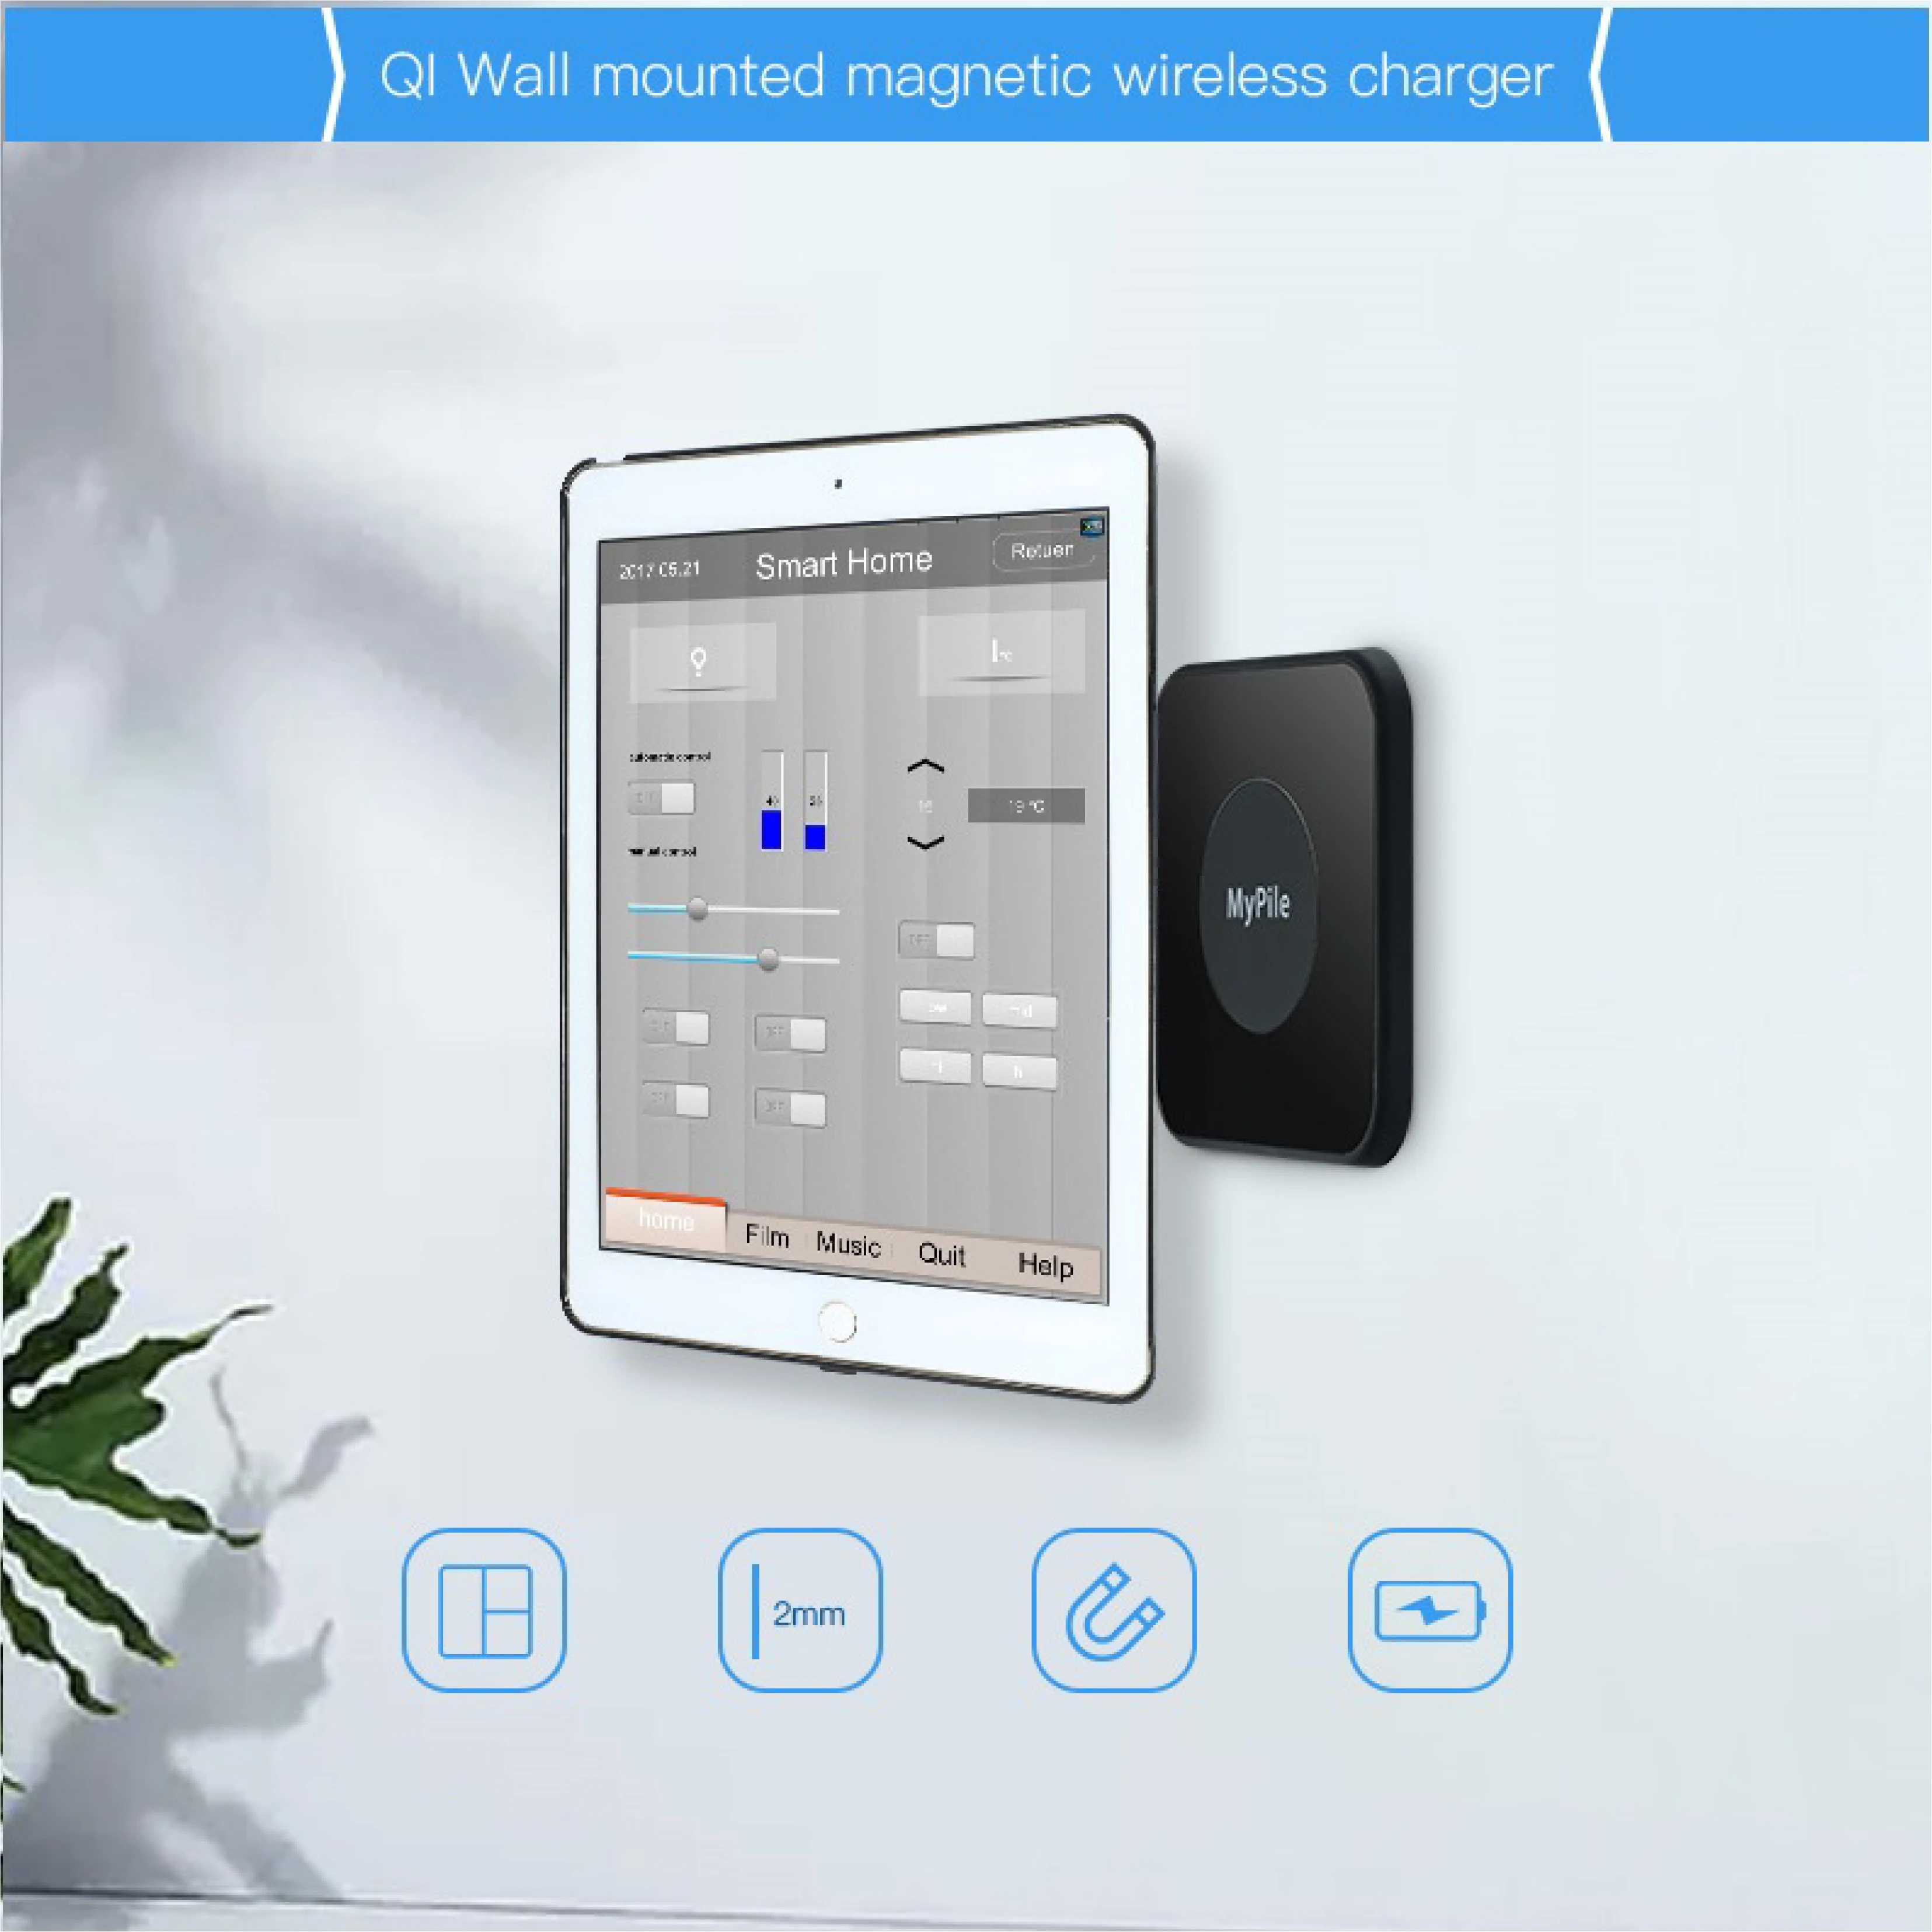 Ipad Wireless Charging, Magnetic Wall Mount - Smart Home Control -  AliExpress